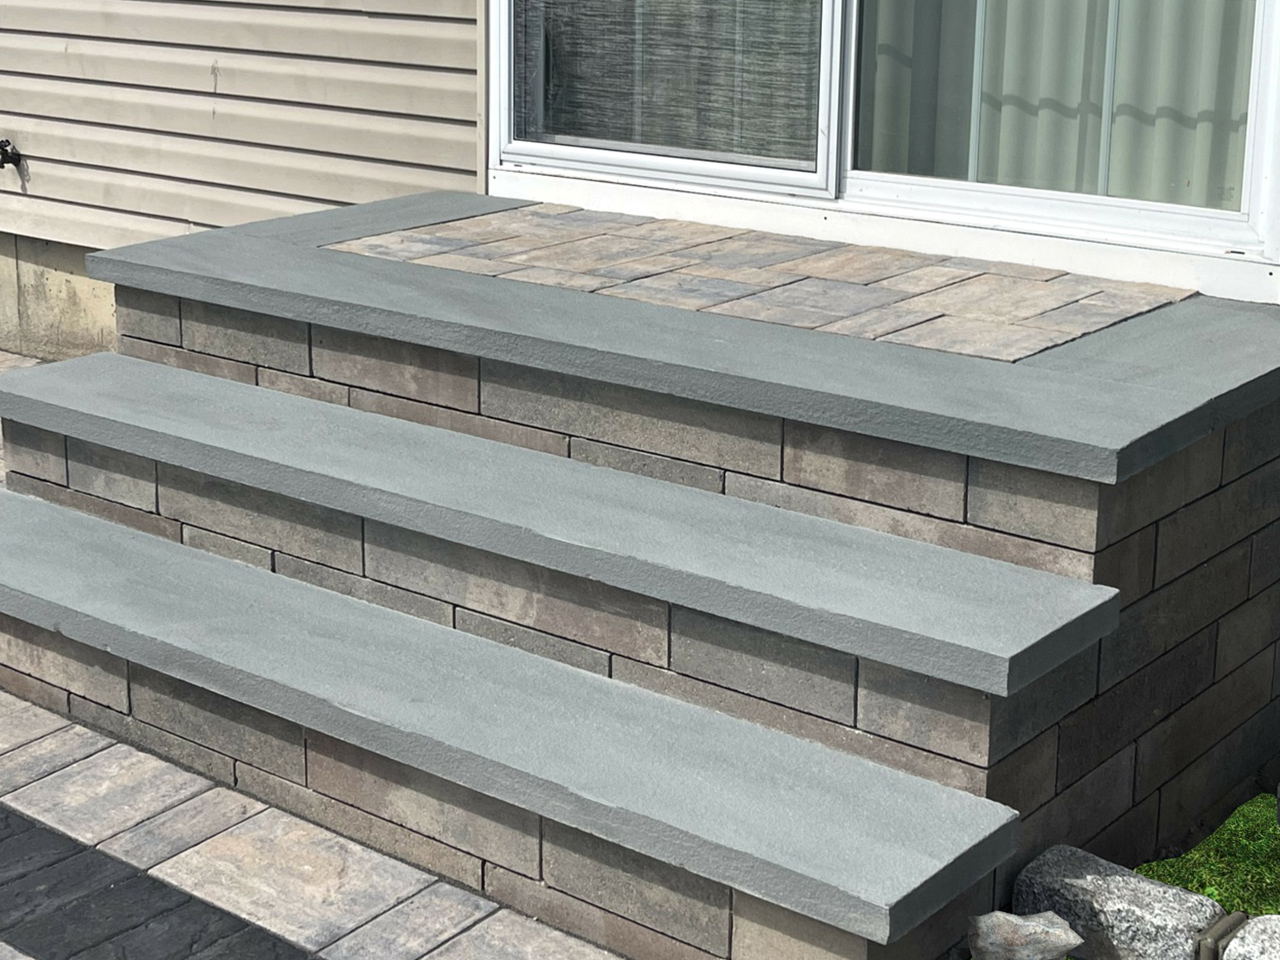 Natural stone steps with organic shapes that add a touch of originality and natural beauty